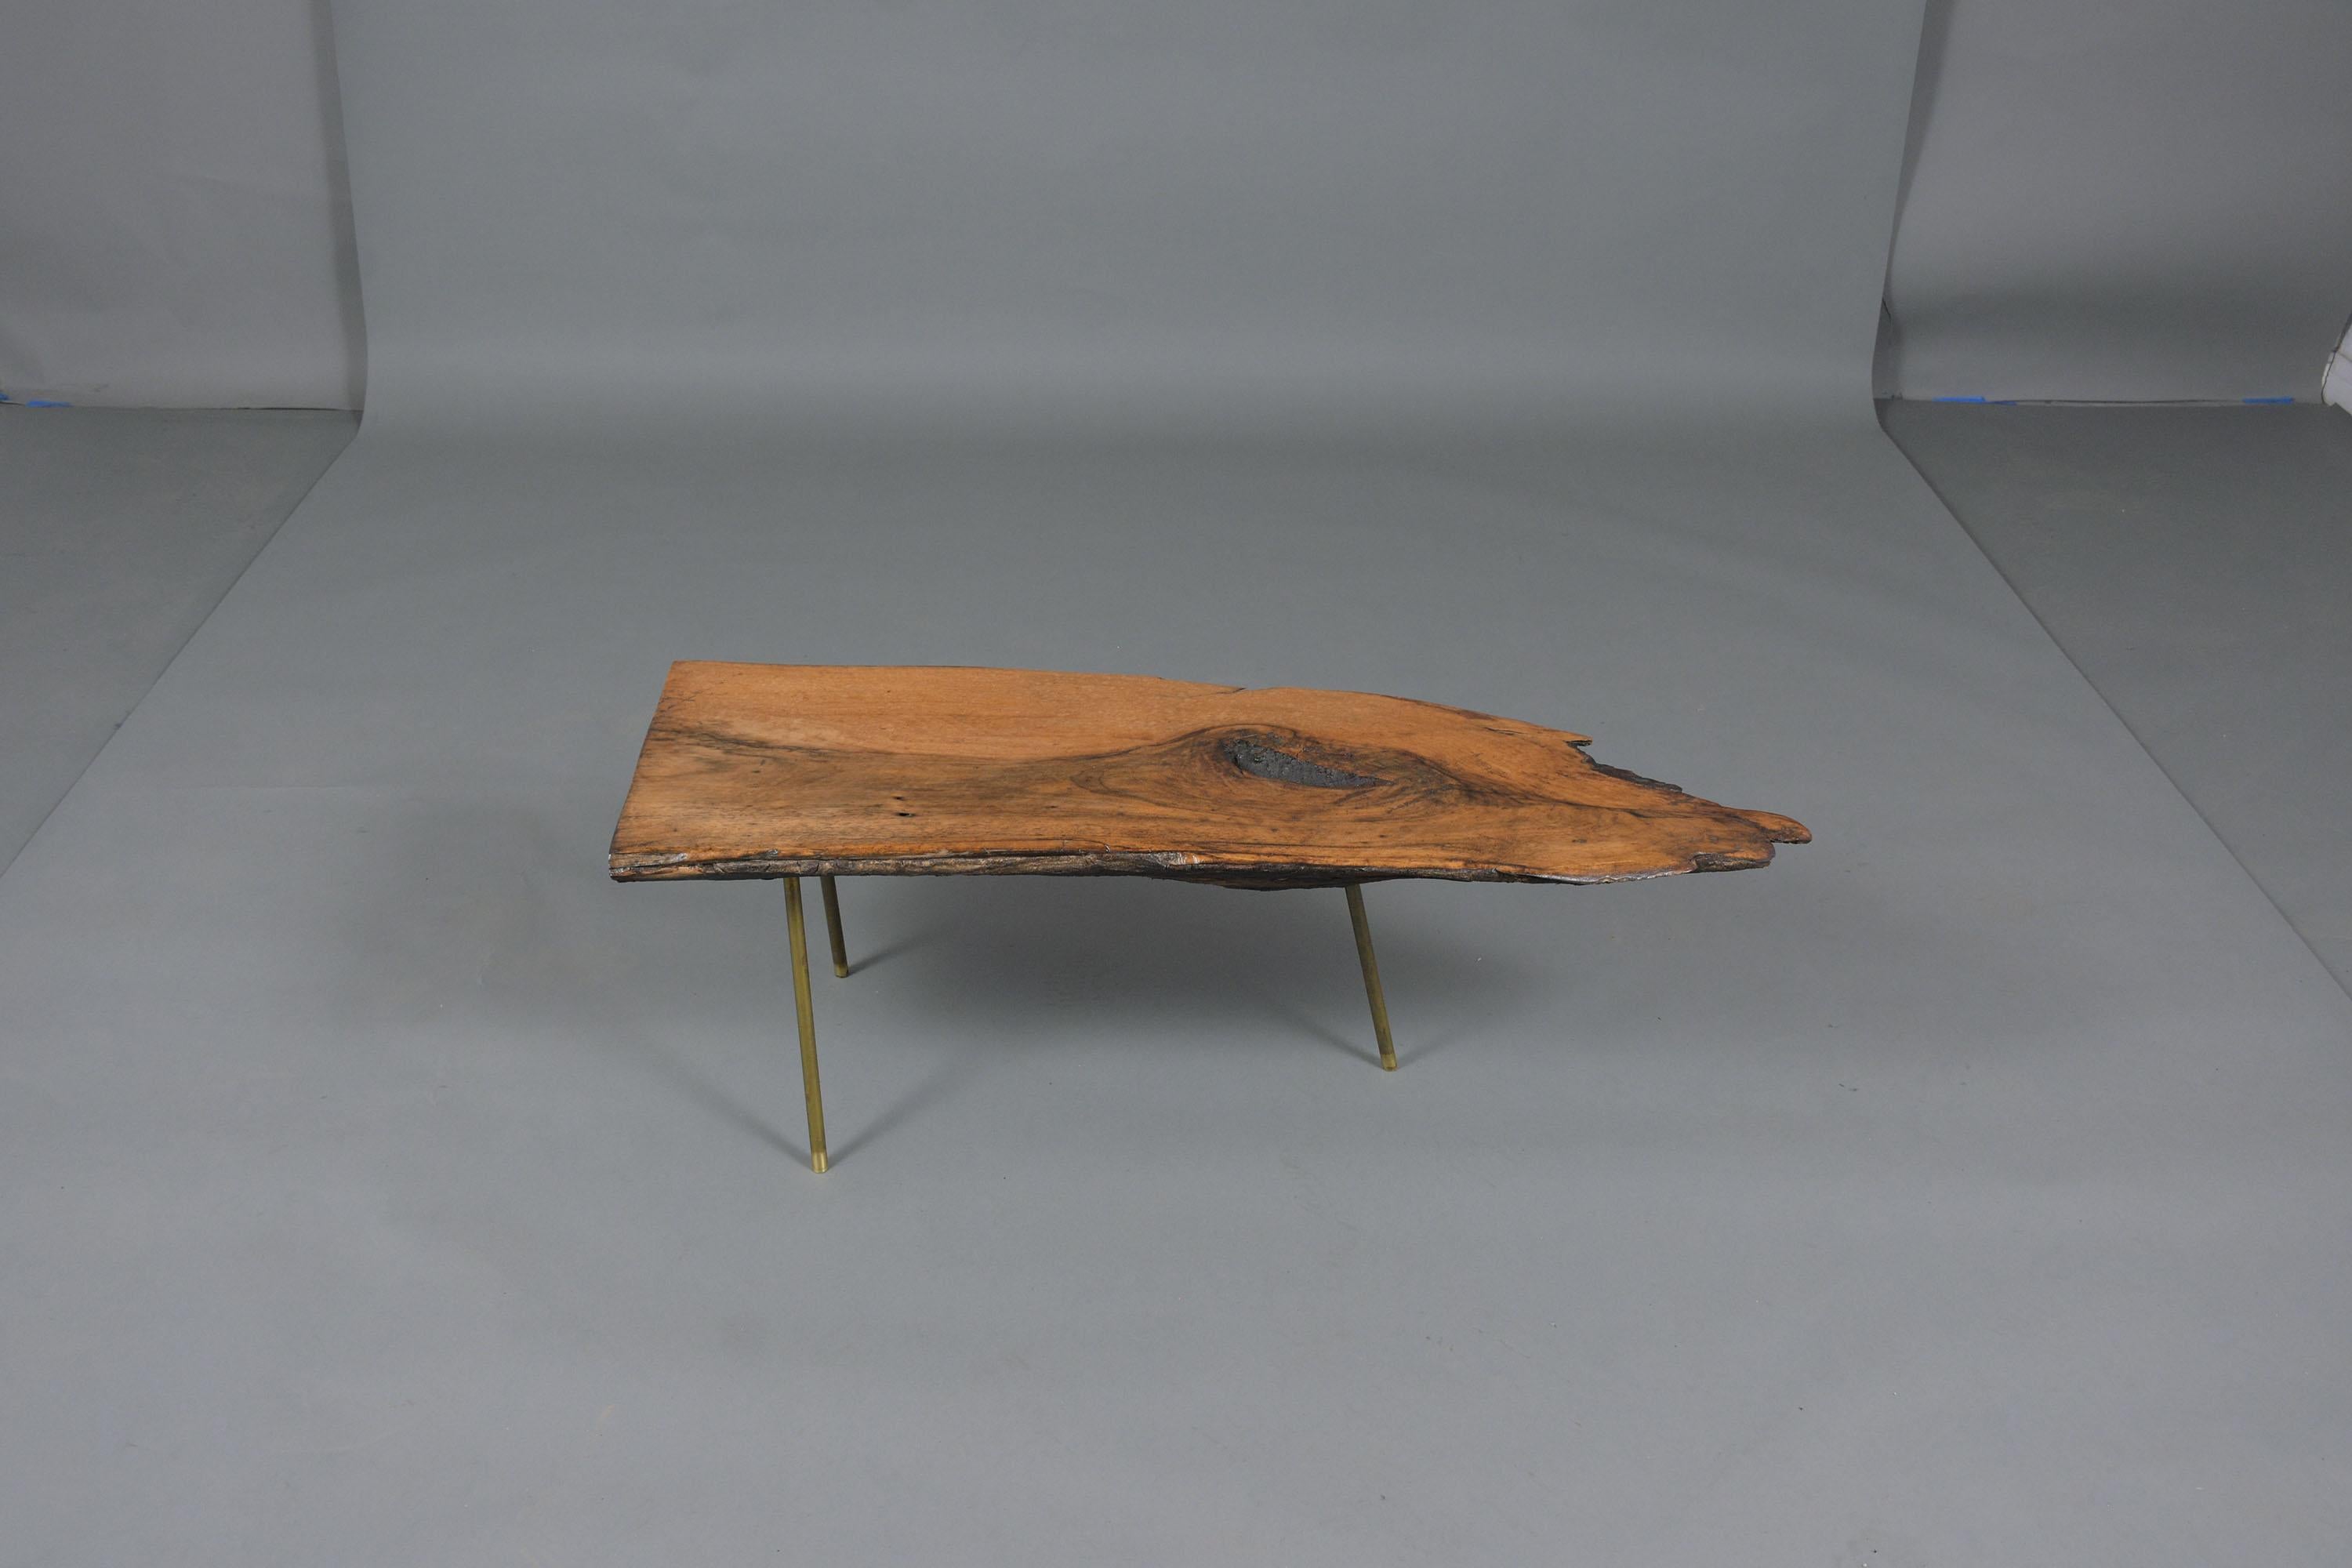 An eye-catching organic modern coffee table in the manner of Carl Auböck crafted out of wood features a free-form wood slab top stained in a natural newly polished with a beautiful patina finish. This intricated side table sits on three solid brass